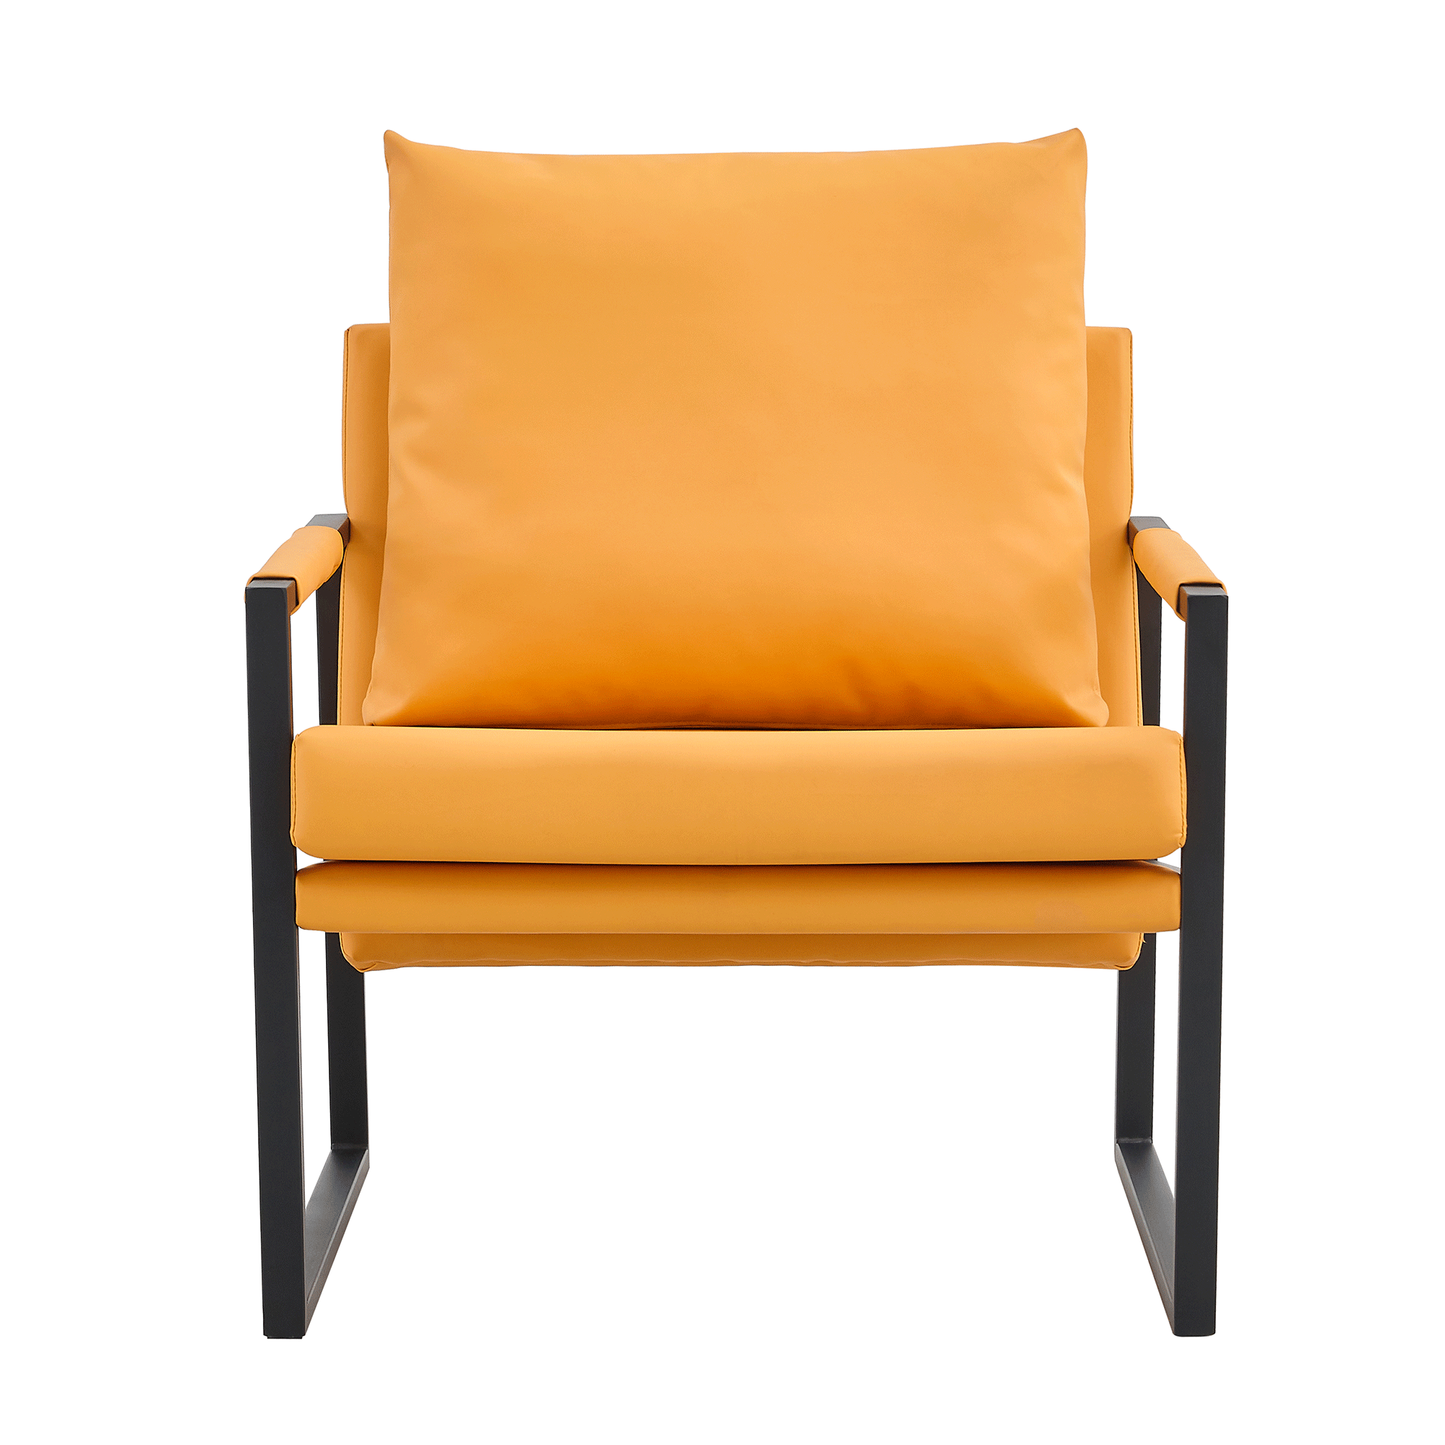 PU Leather Accent Arm Chair Mid Century Modern Upholstered Armchair with Metal Frame Extra-Thick Padded Backrest and Seat Cushion Sofa Chairs for Living Room (orange PU Leather + Metal Frame + Foam)